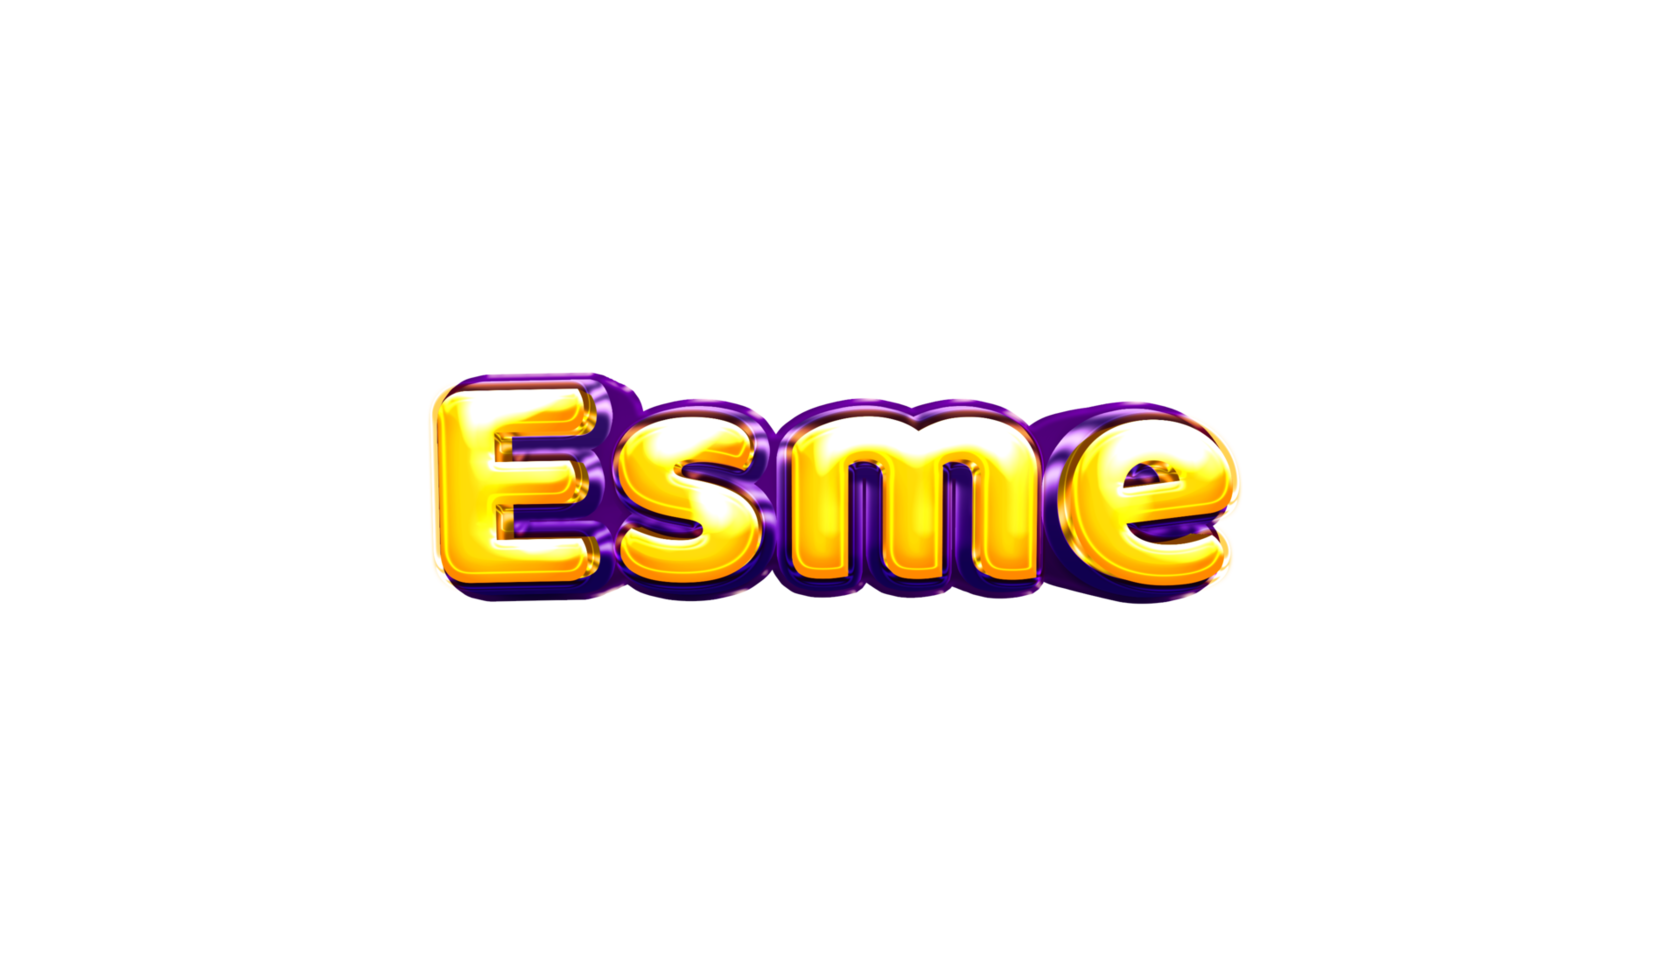 girls name sticker colorful party balloon birthday helium air shiny yellow purple cutout Esme png